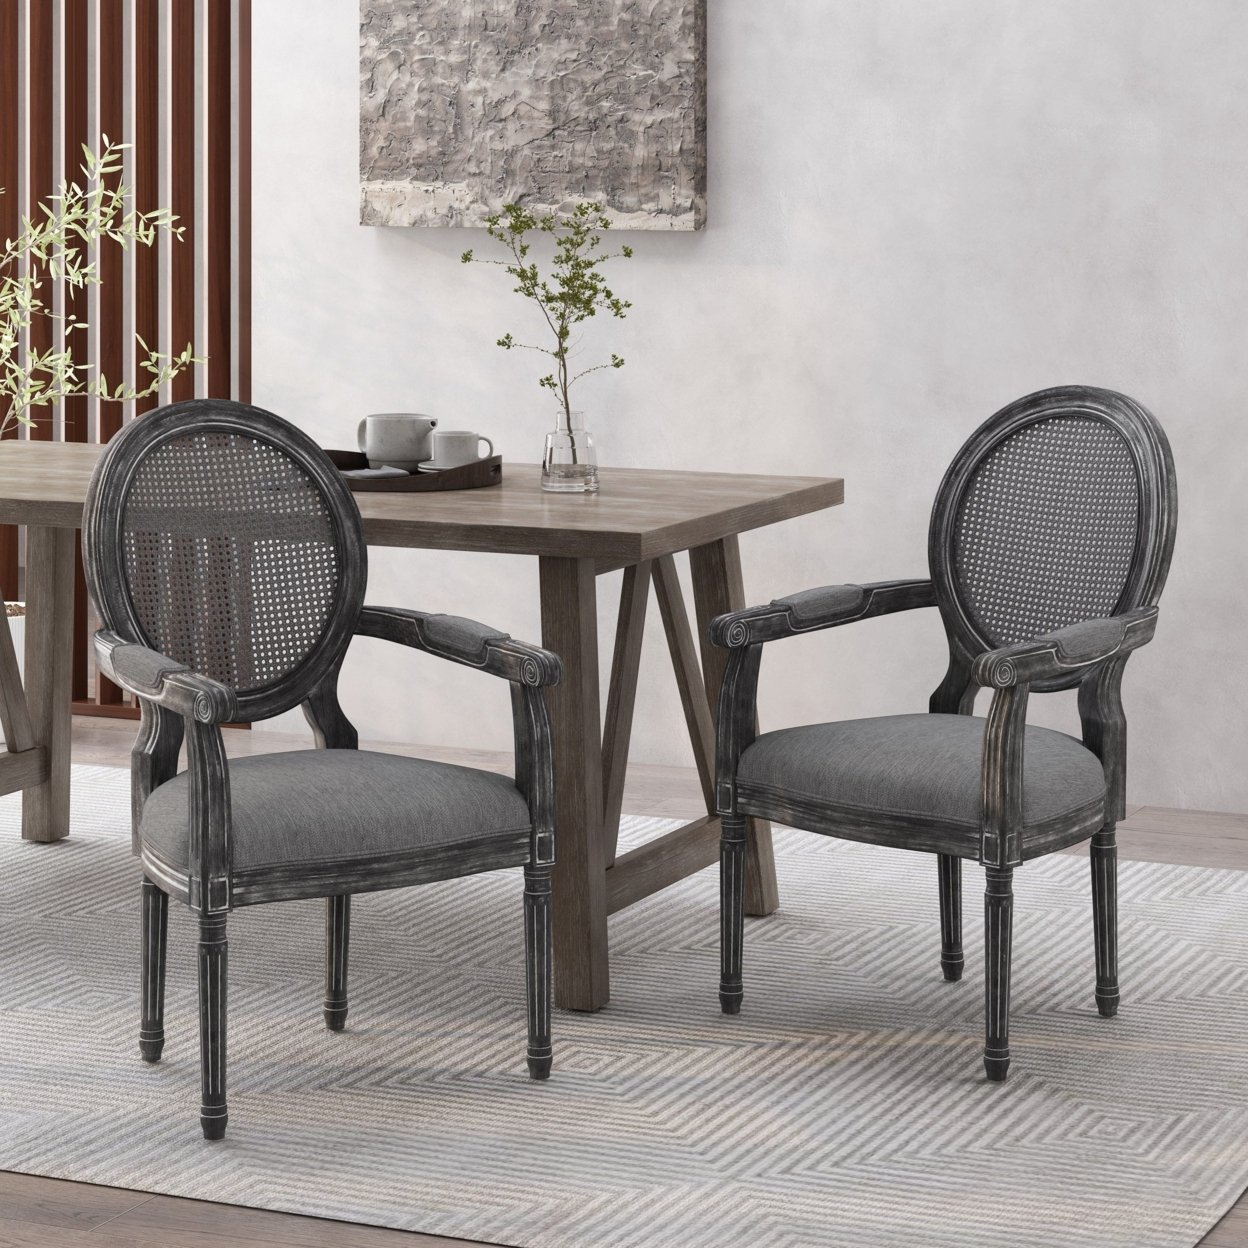 Aisenbrey French Country Wood And Cane Upholstered Dining Chair - Gray/brown, Set Of 2